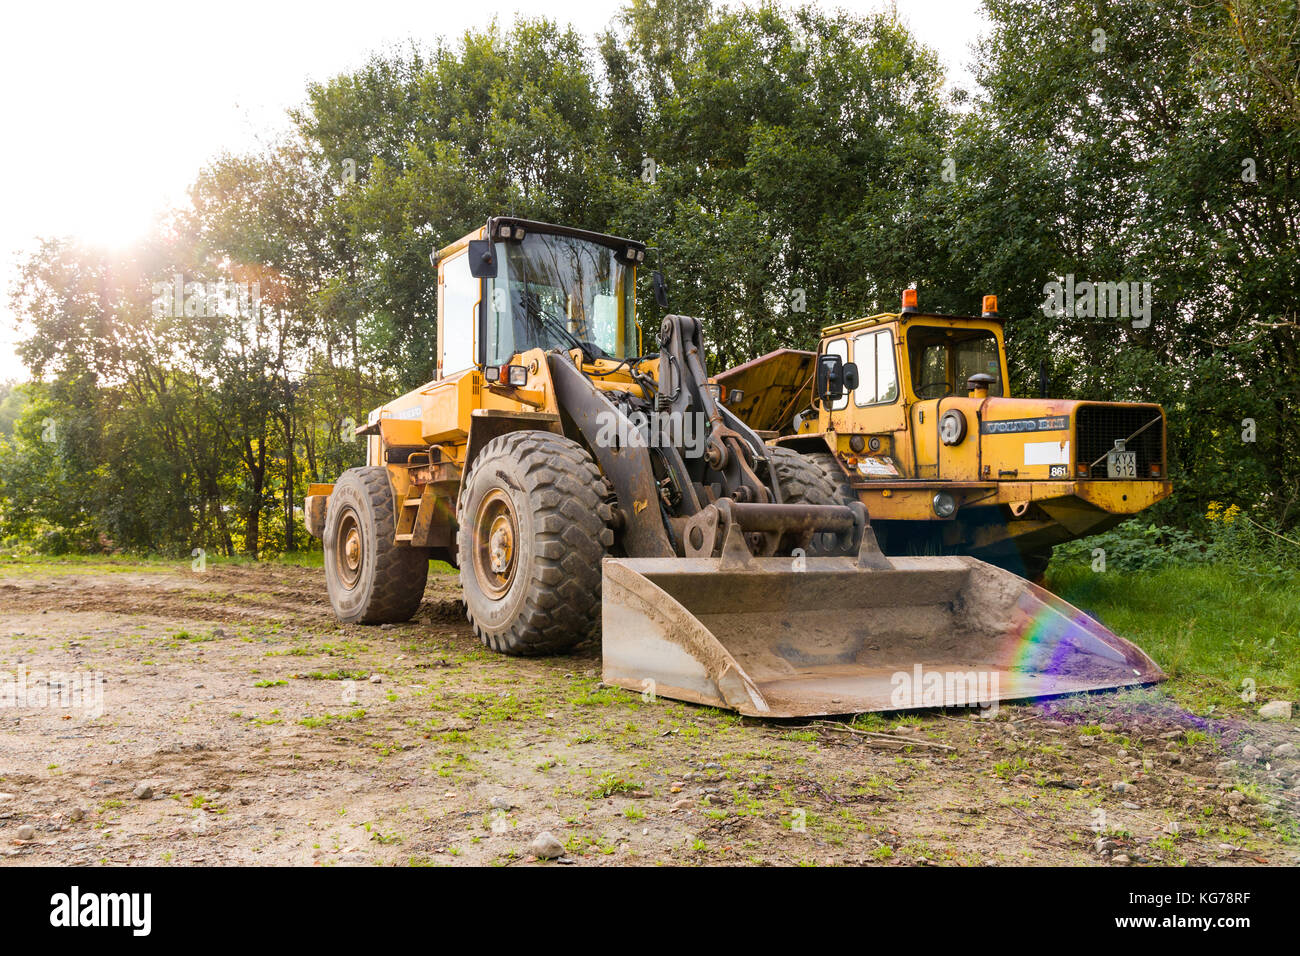 Volvo BM front loader scooping up rainbow looking reflection  Model Release: No.  Property Release: No. Stock Photo